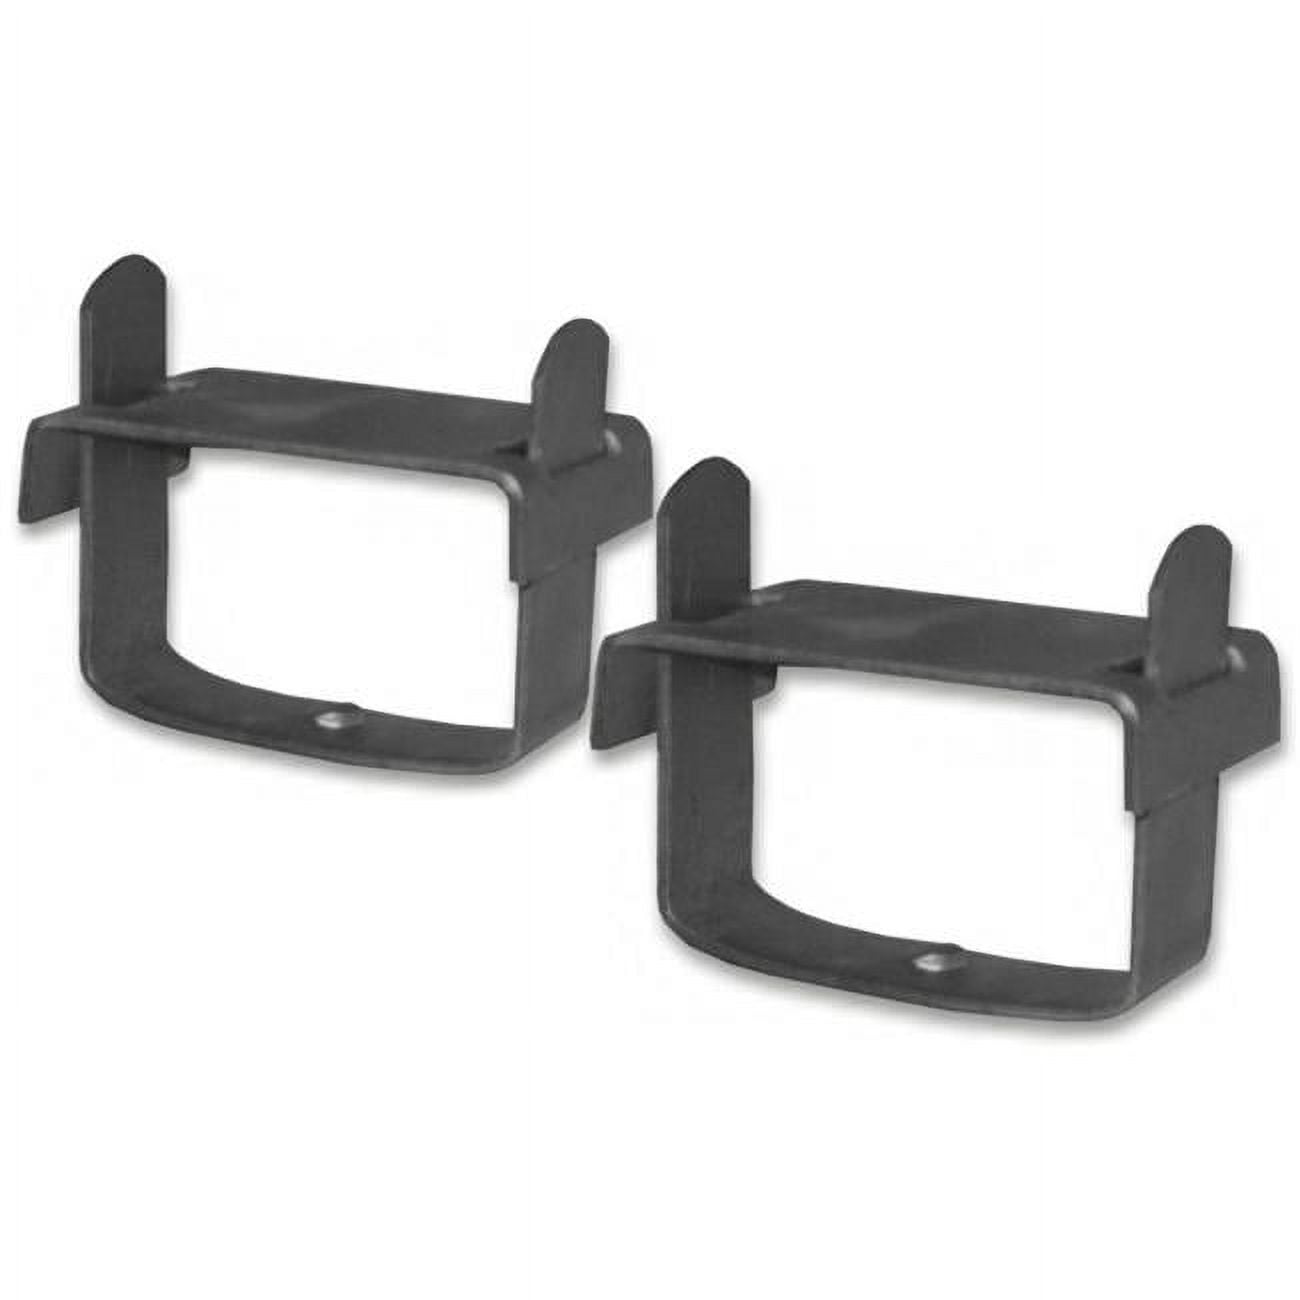 Picture of Billet4X4 LSC134-2 1.75 in. Axle Leaf Spring Clamps - 4X4 Off-Road Vehicles - Set of 2